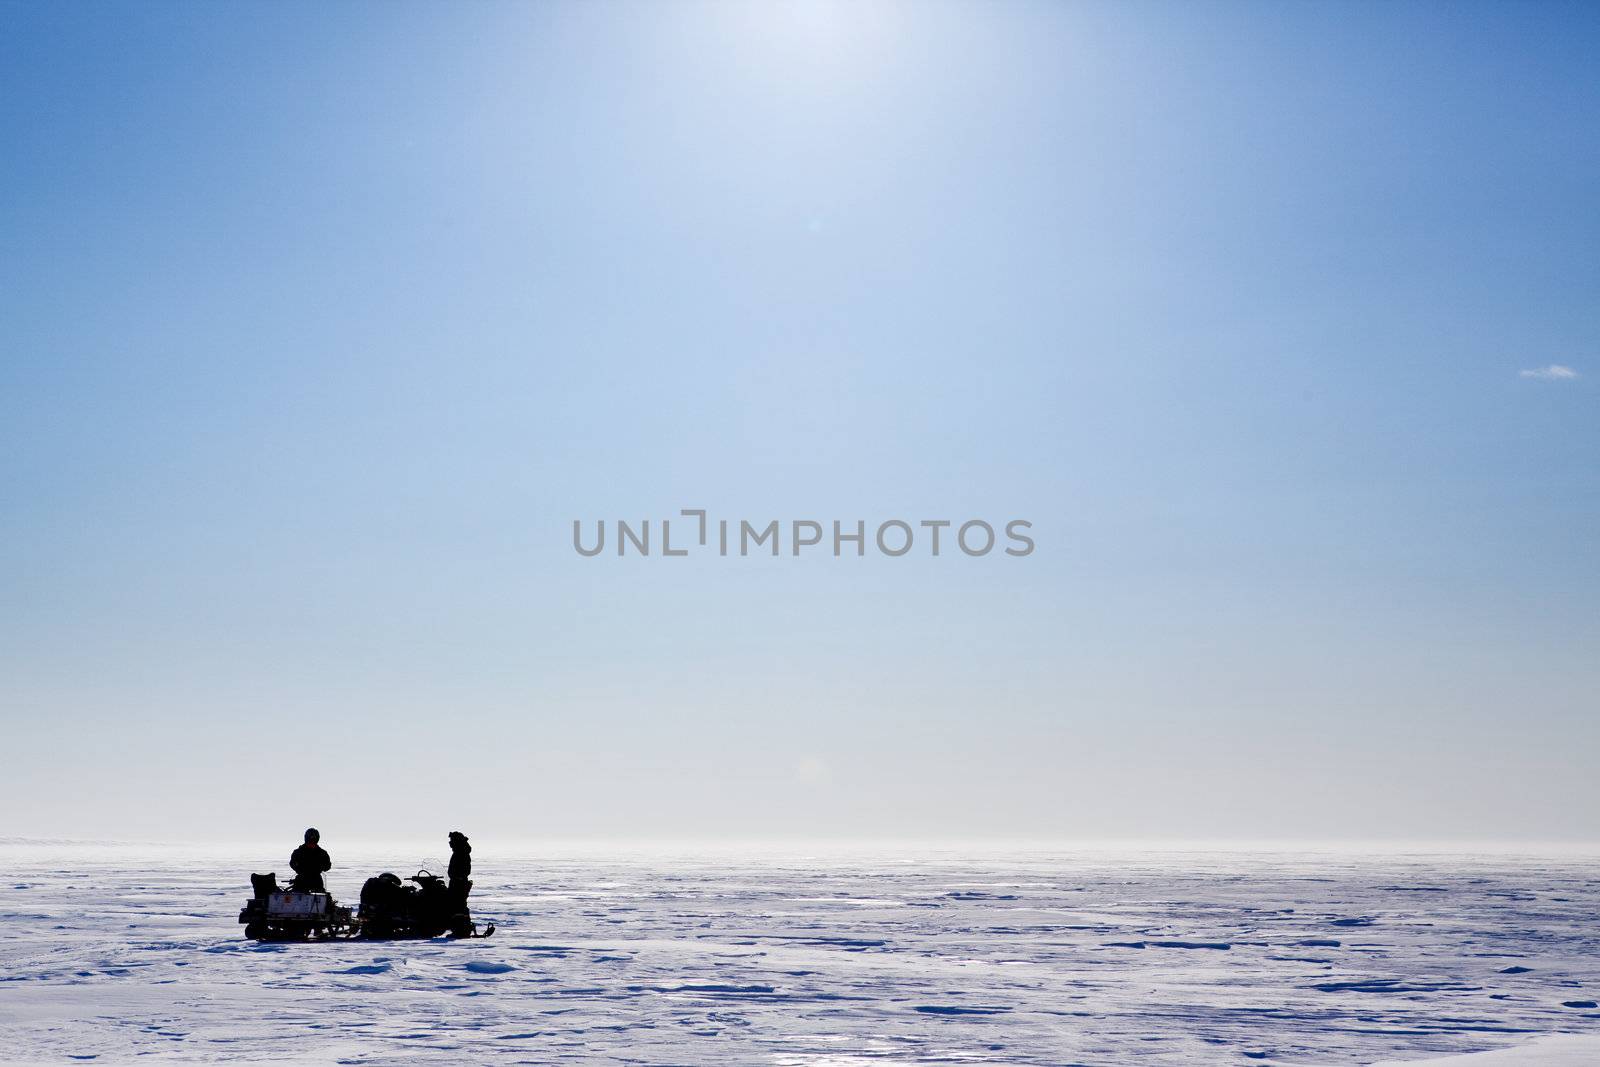 A barren flat winter landscape with two people and snowmobiles